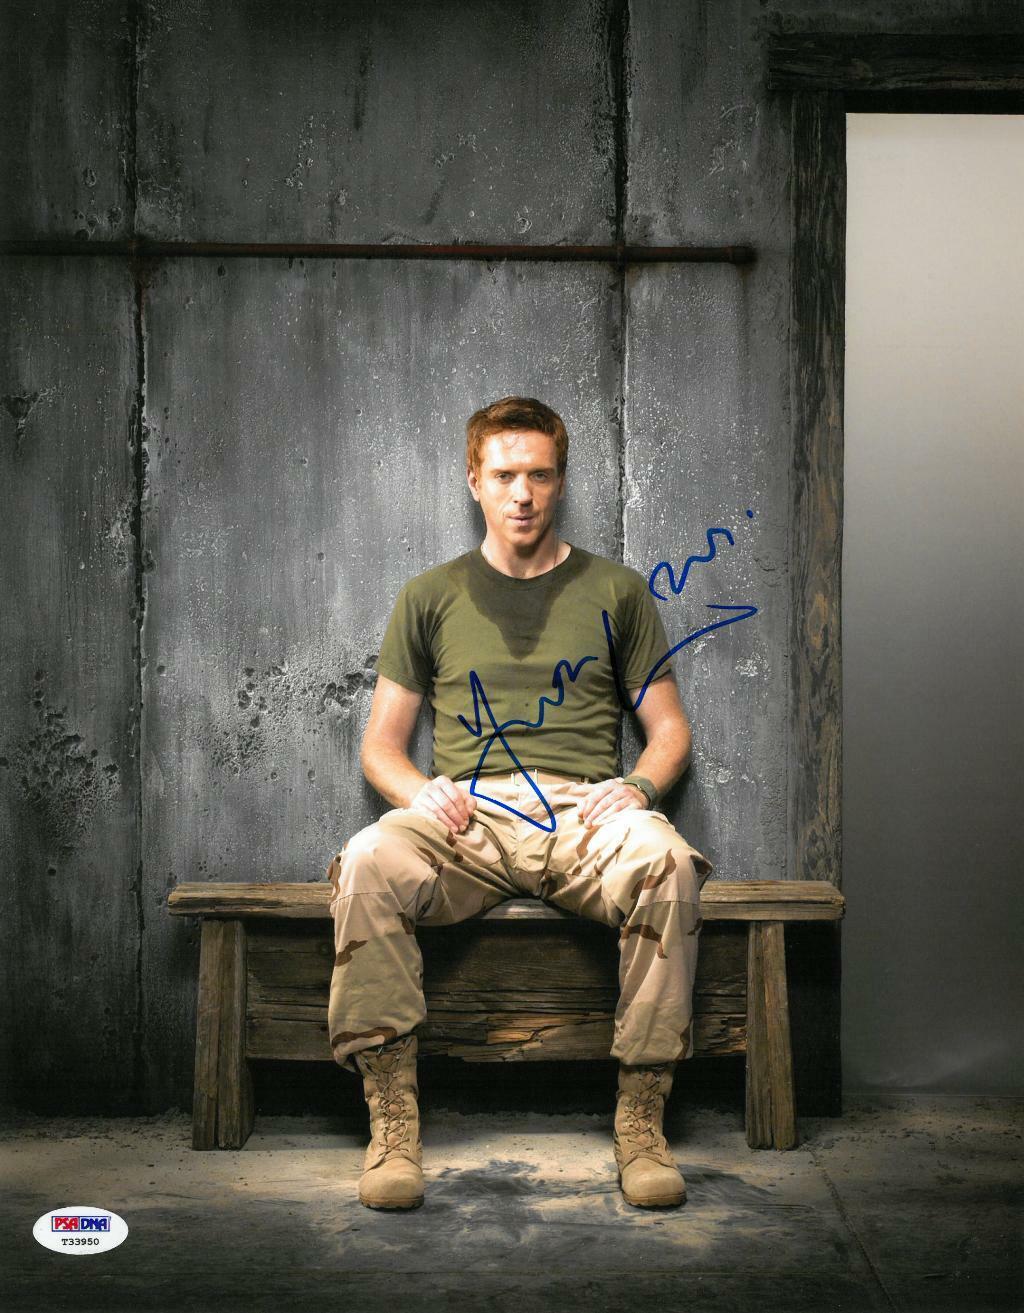 Damian Lewis Signed Band of Brothers Autographed 11x14 Photo Poster painting PSA/DNA #T33950